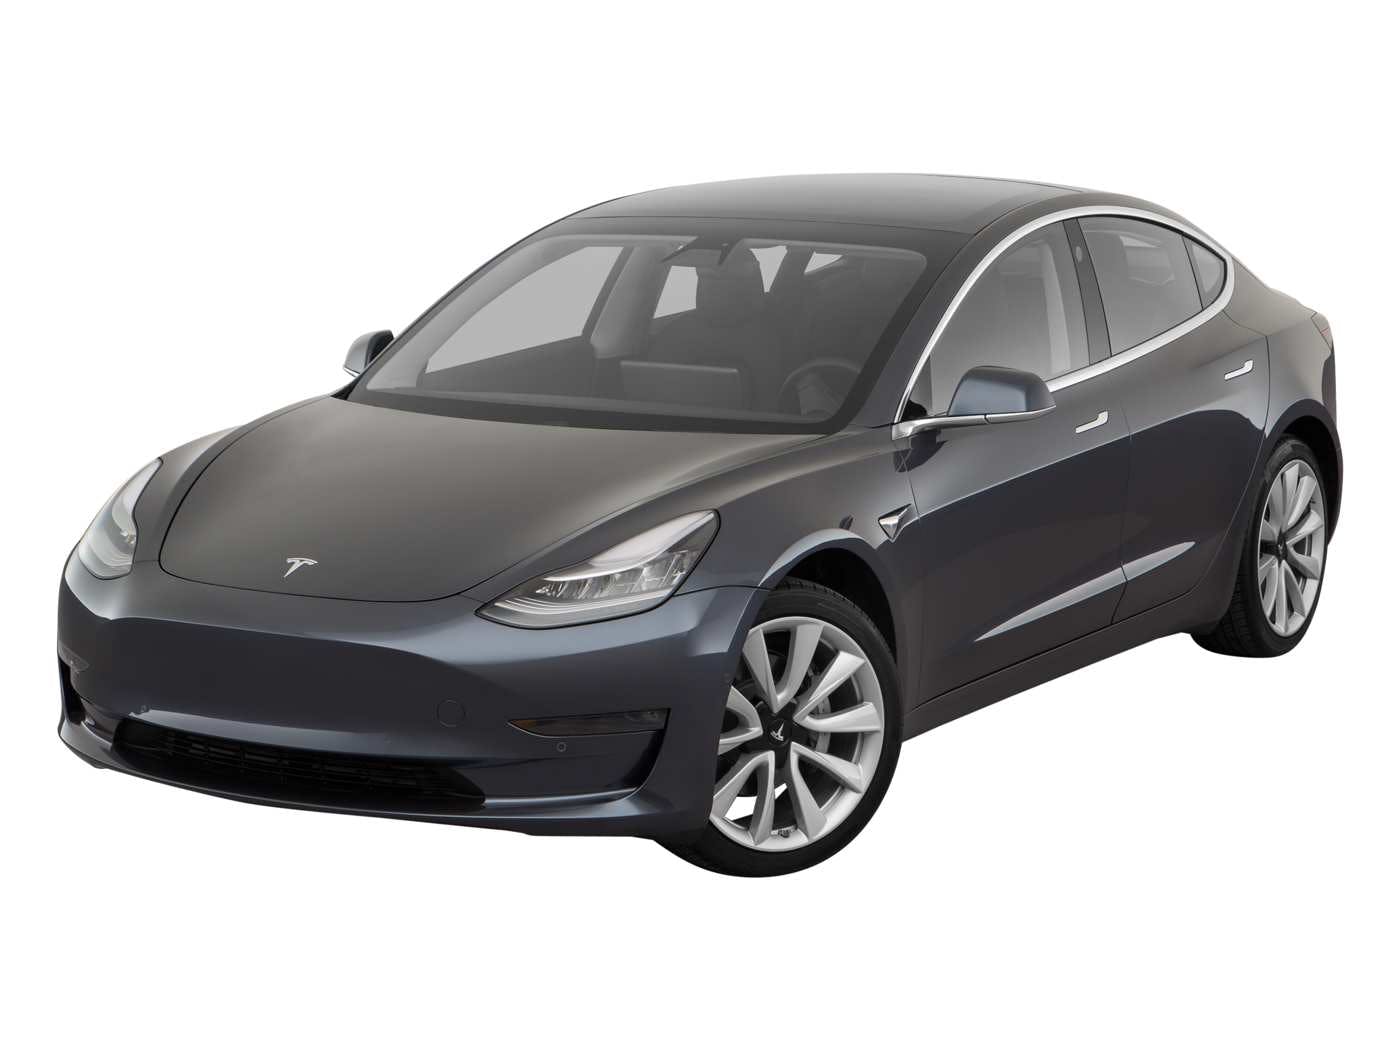 2018 Tesla Model 3 review: ratings, specs, photos, price and more